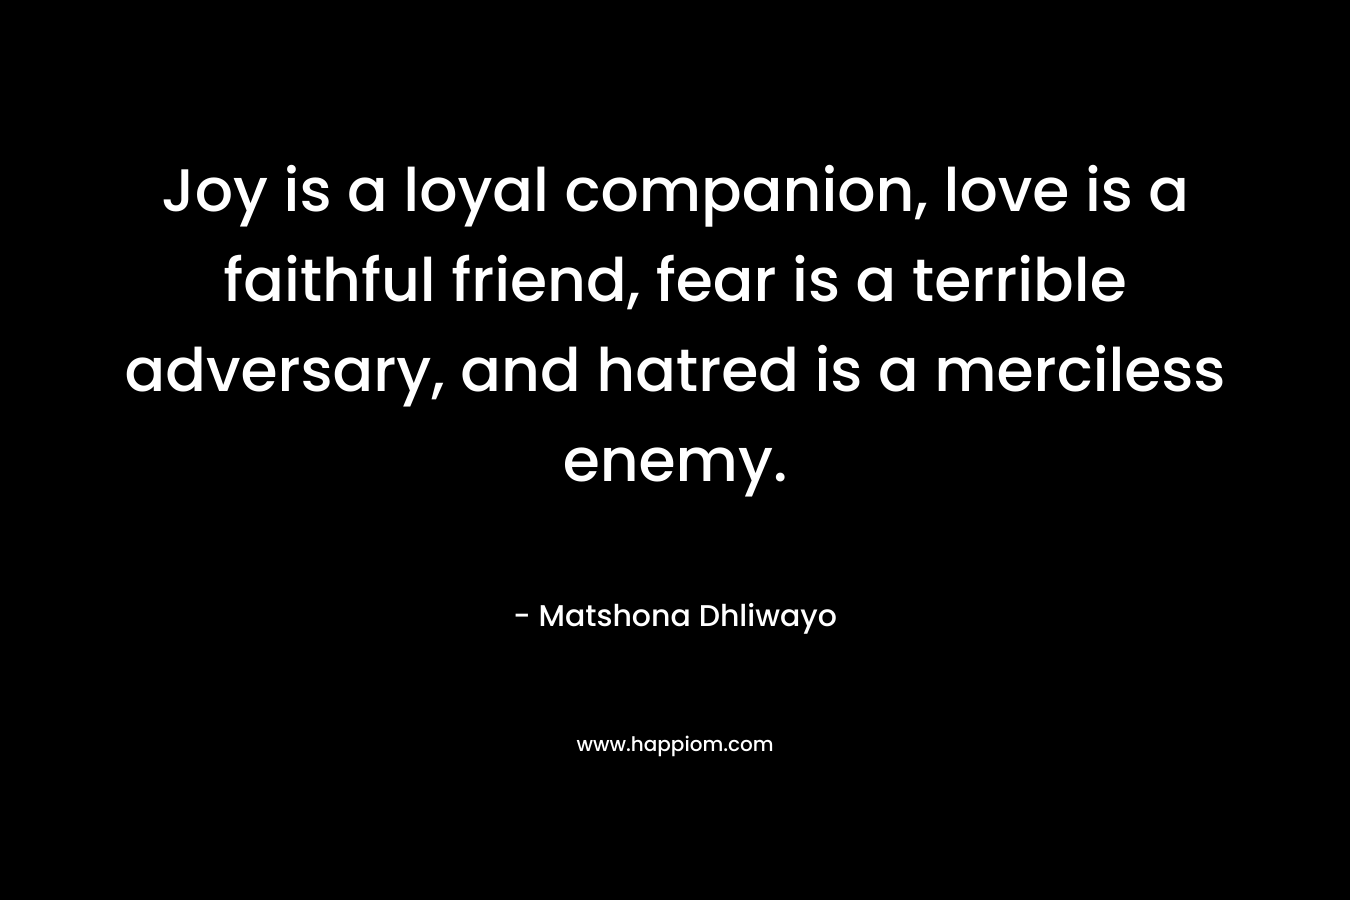 Joy is a loyal companion, love is a faithful friend, fear is a terrible adversary, and hatred is a merciless enemy.